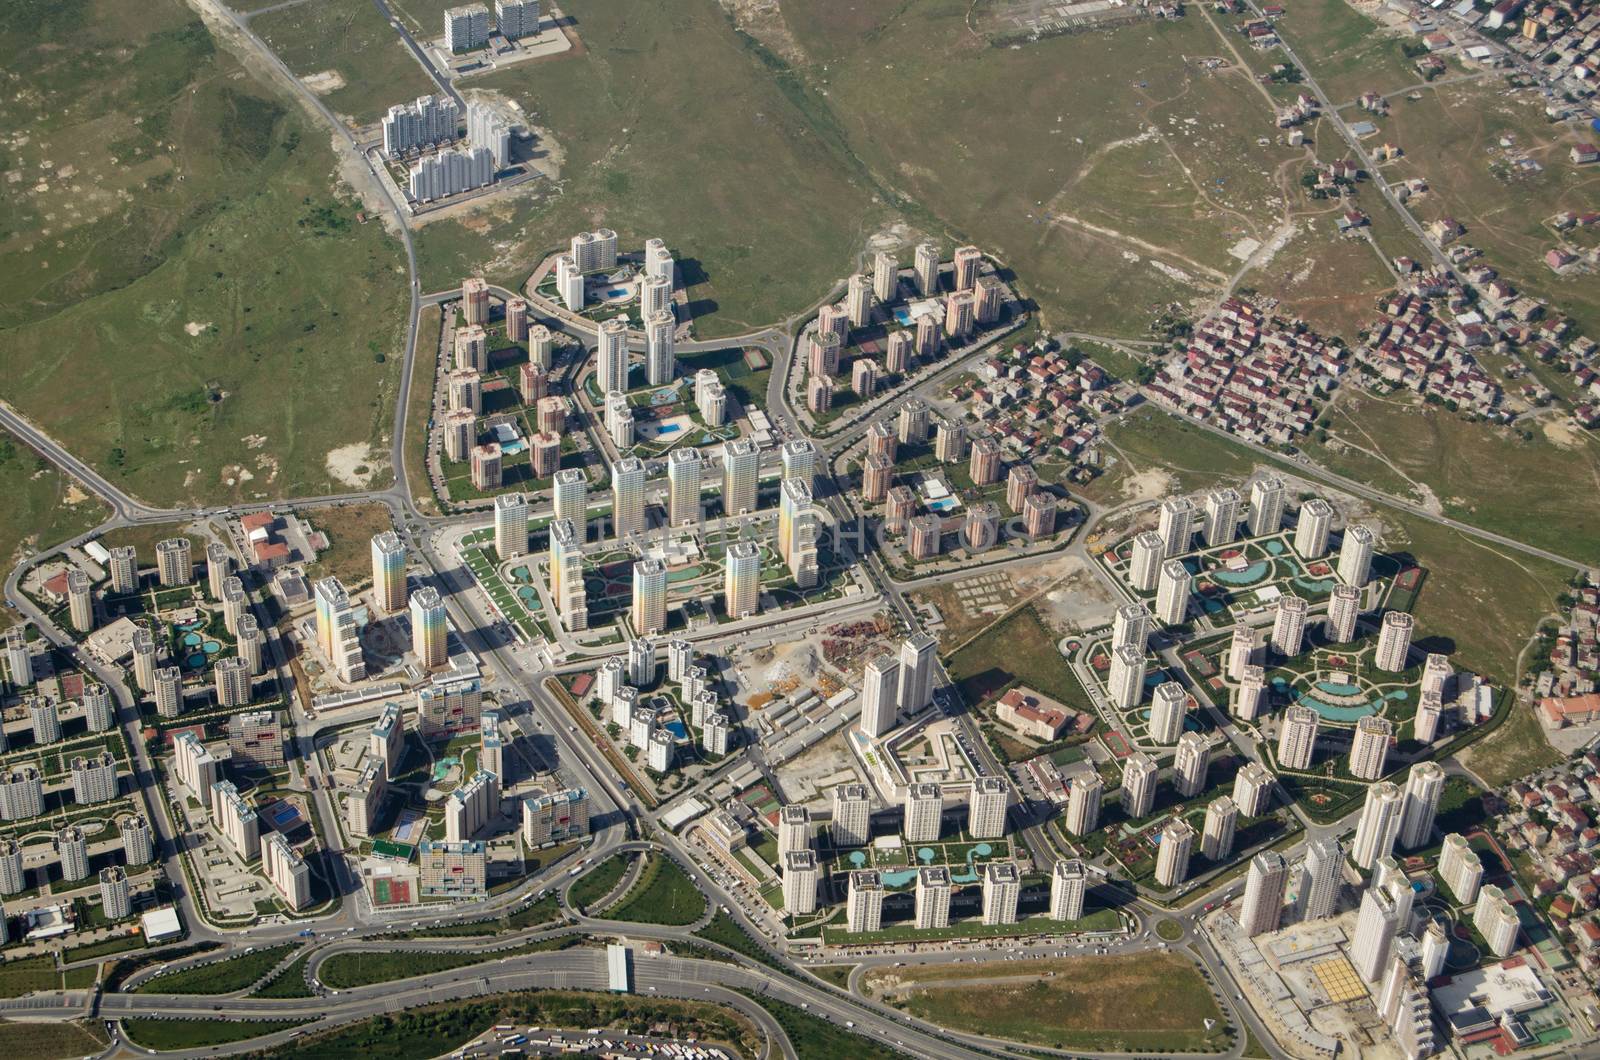 Aerial view of a new high-rise housing development with colourful blocks of flats built with swimming pools attached. Western suburbs of Istanbul, Turkey.